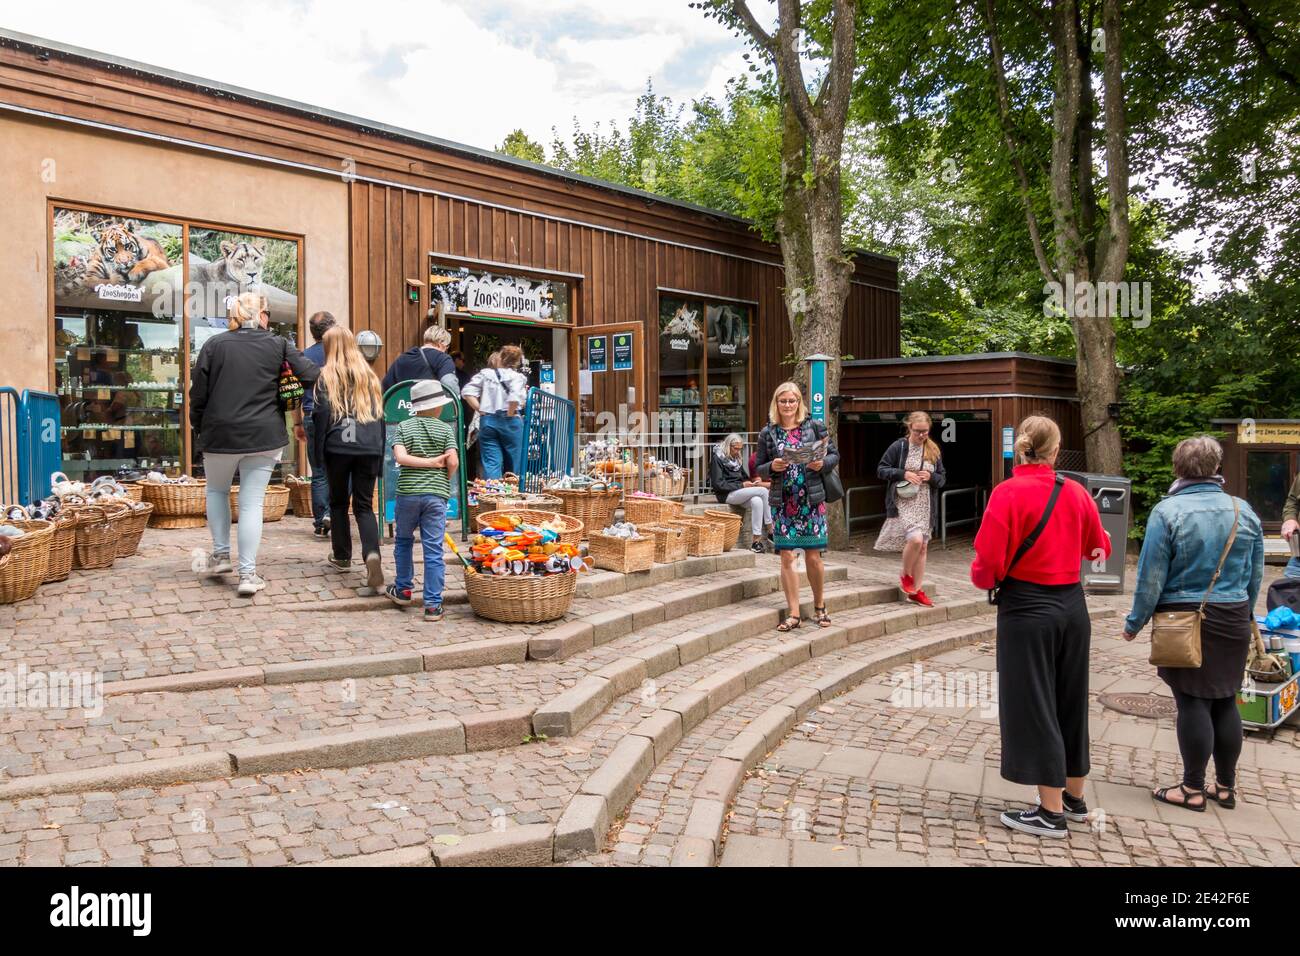 Aalborg, Denmark - 25 Jul 2020: Zoo shop in Aalborg zoo, People are standing on the stairs to the shop with souvenirs Stock Photo